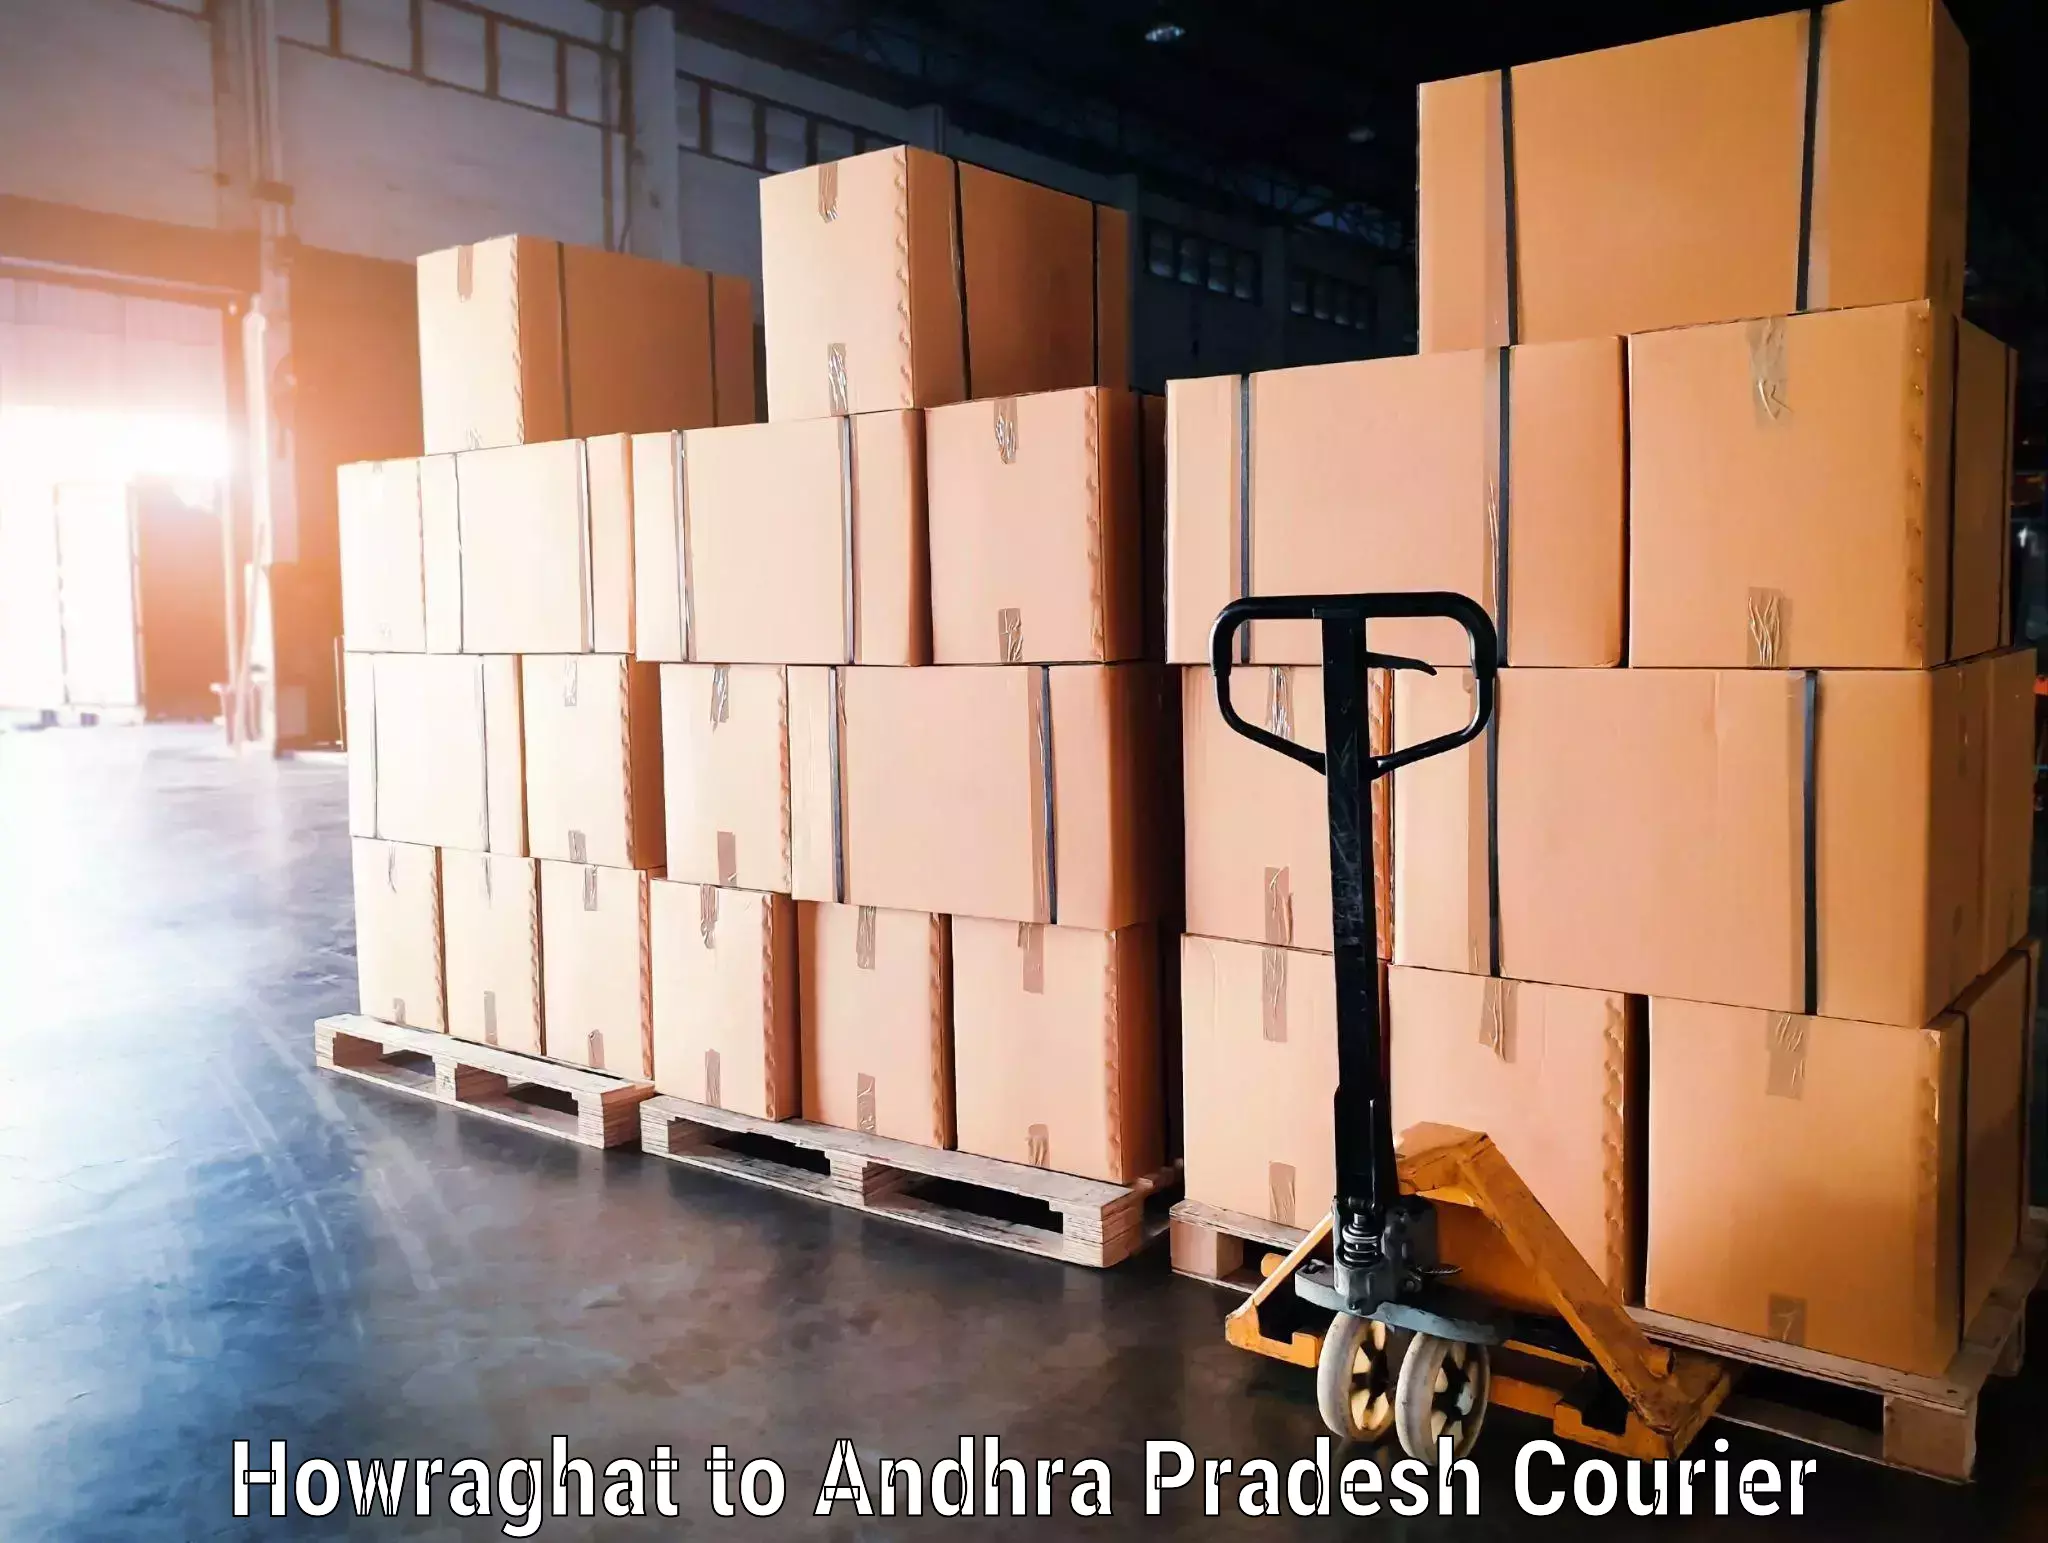 Baggage shipping experts Howraghat to Chodavaram